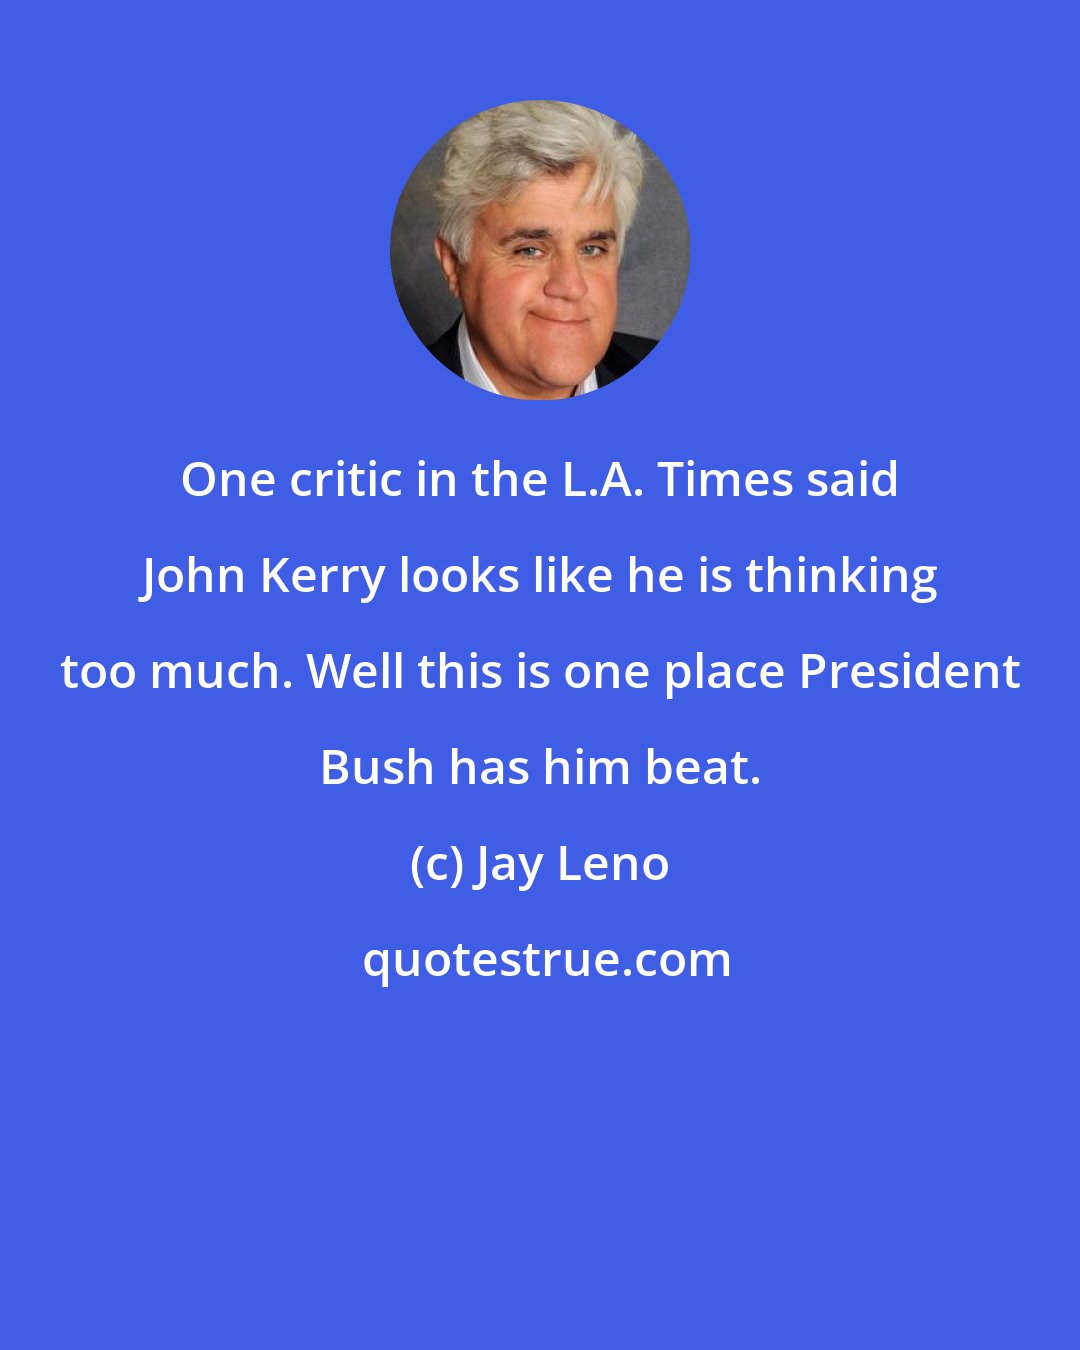 Jay Leno: One critic in the L.A. Times said John Kerry looks like he is thinking too much. Well this is one place President Bush has him beat.